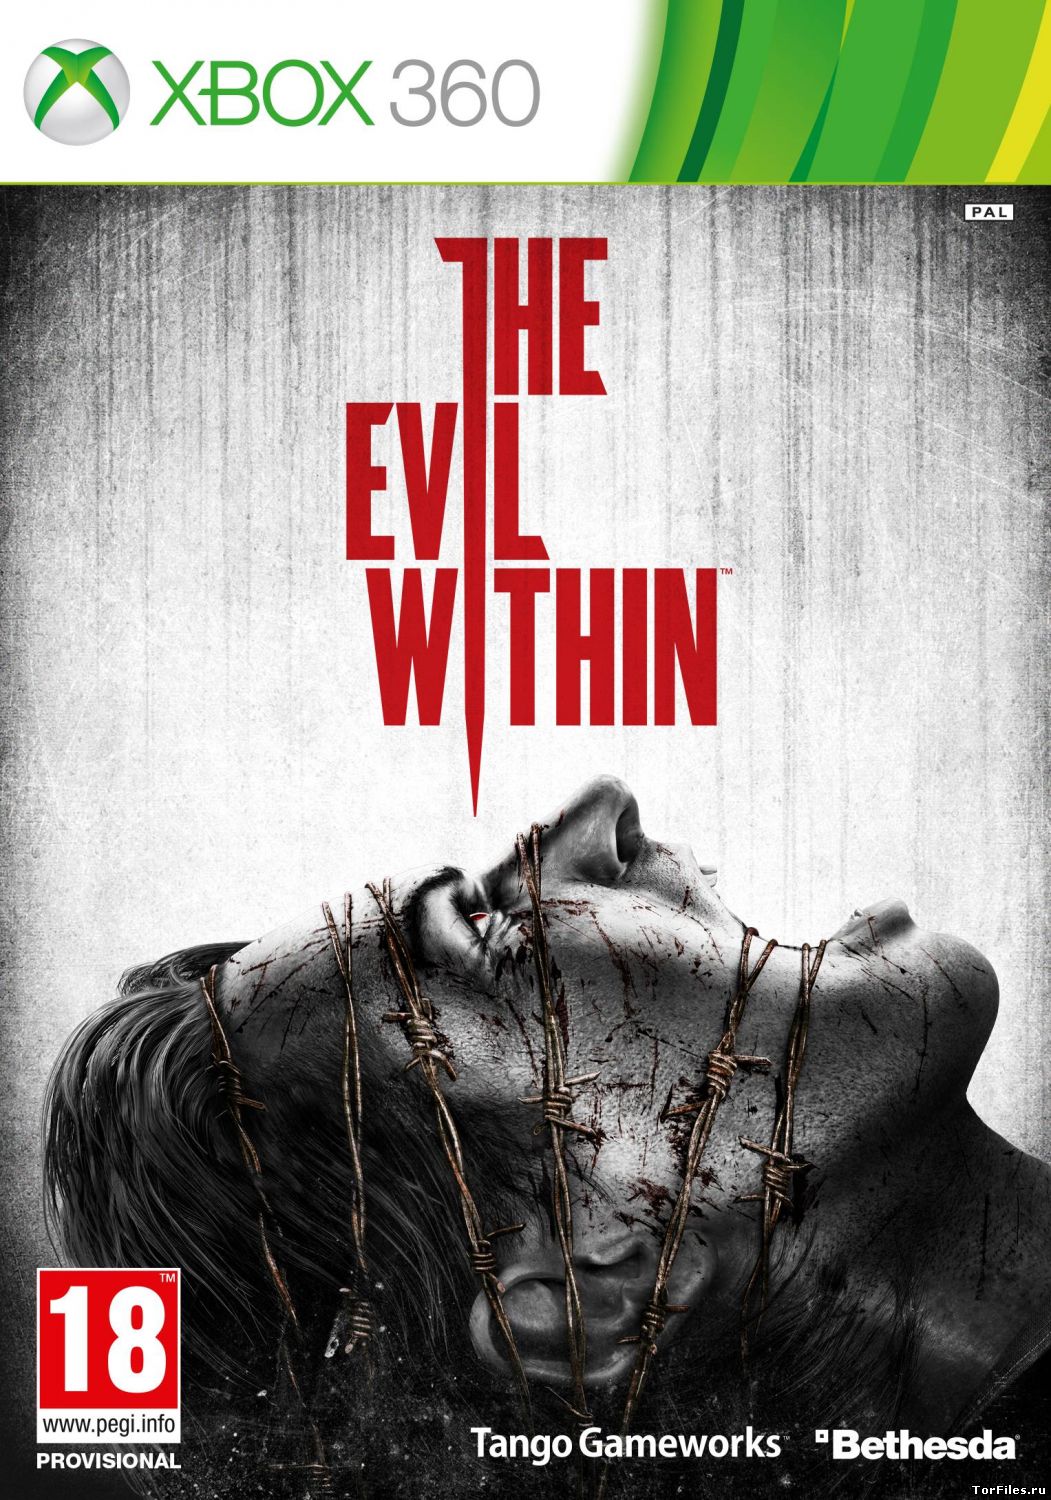 [JTAG] The Evil Within [RUS]